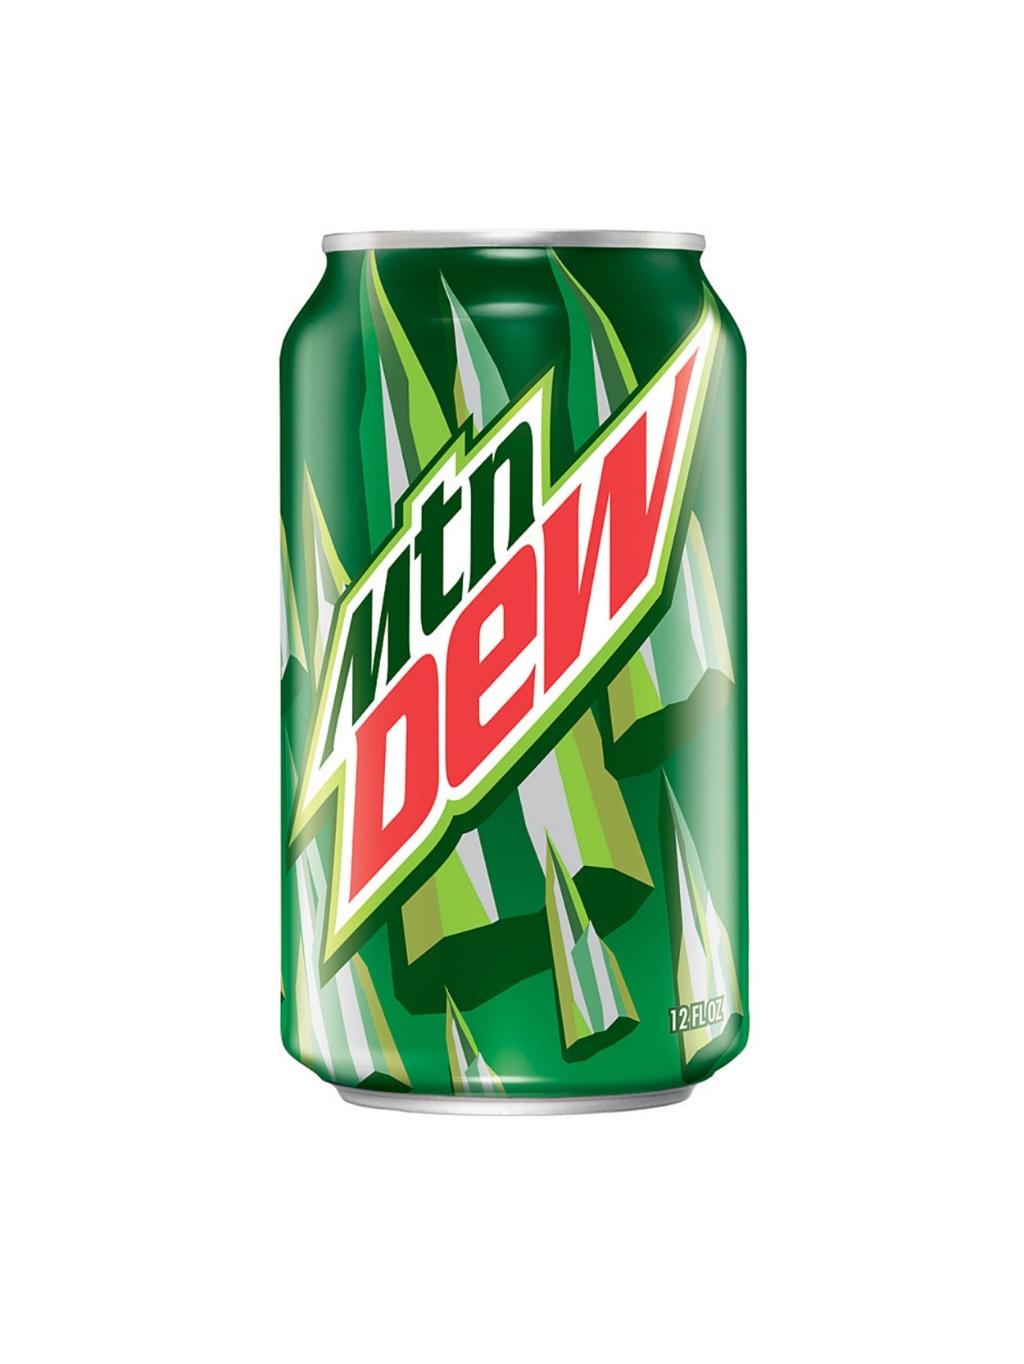 Mtn dew (can)